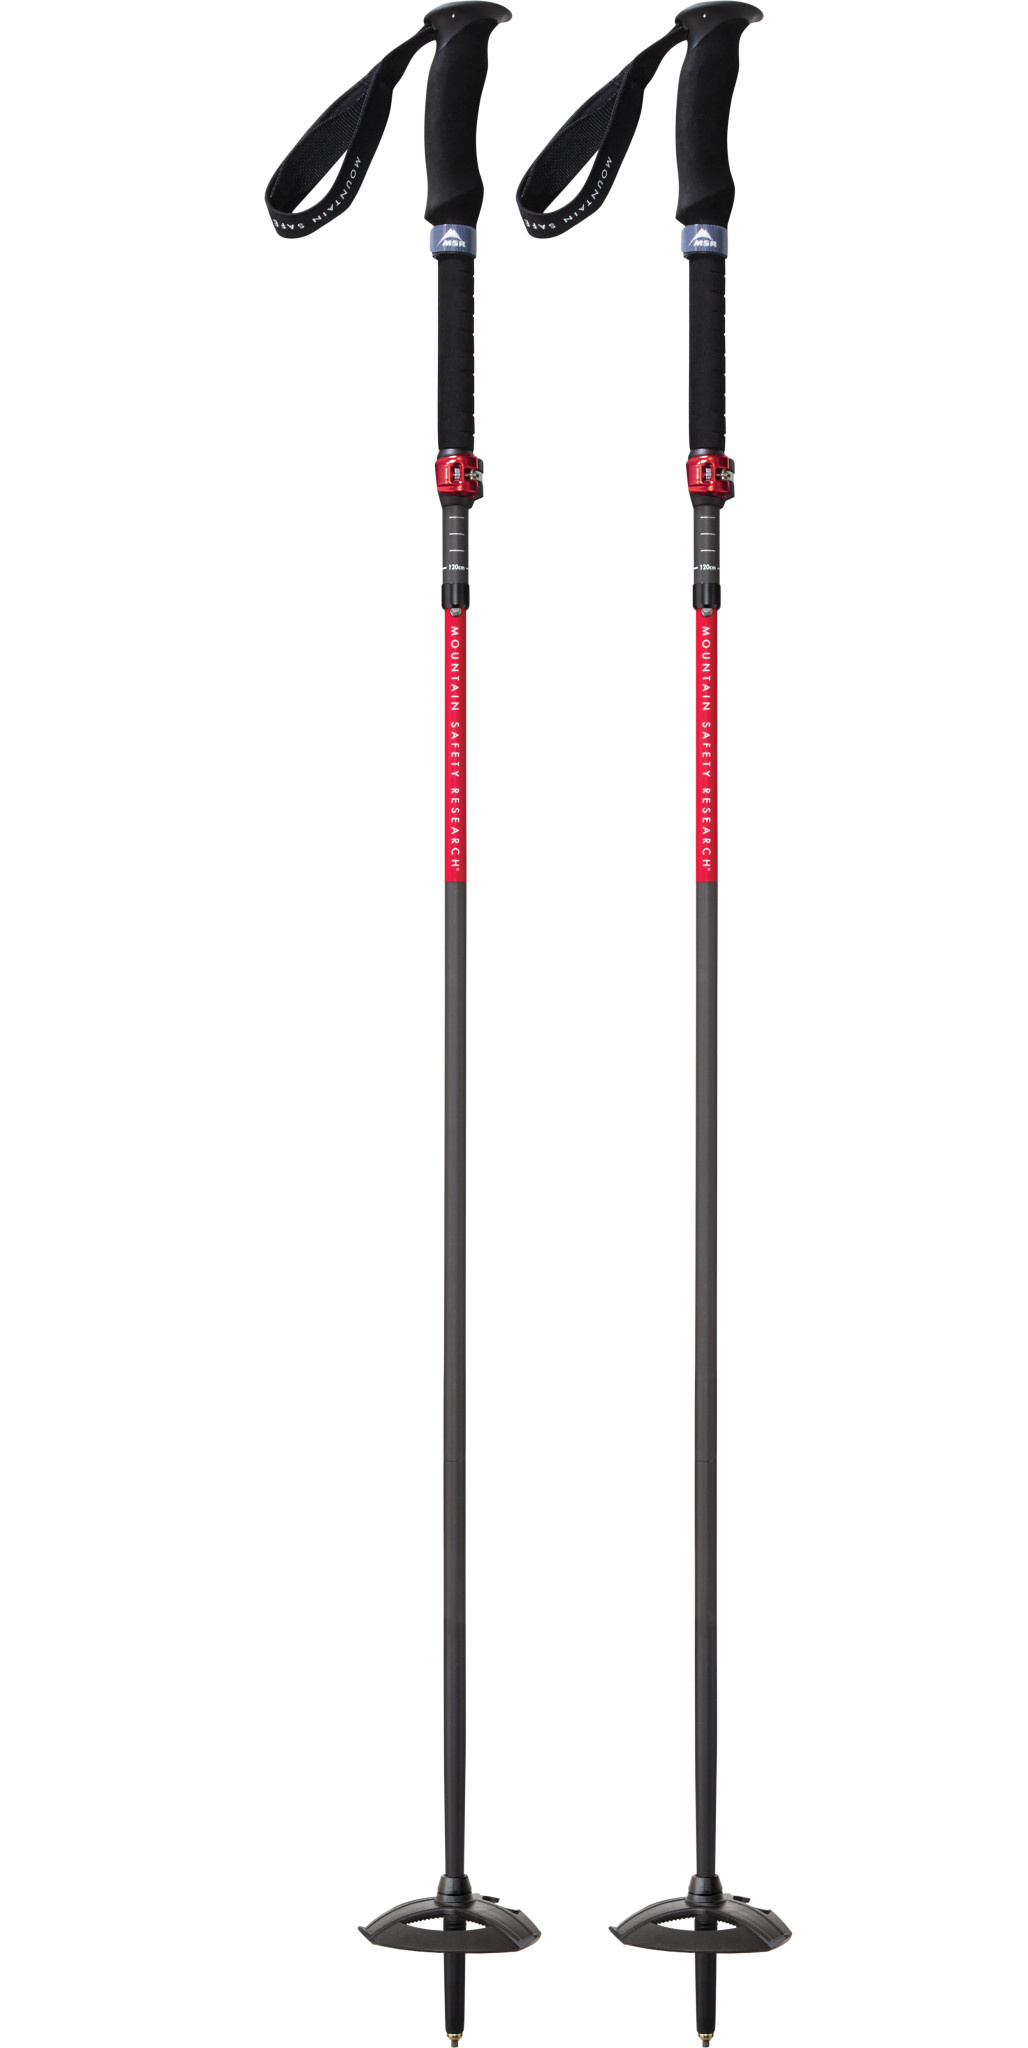 MSR Dynalock Ascent Carbon Poles | The BackCountry in Truckee, CA